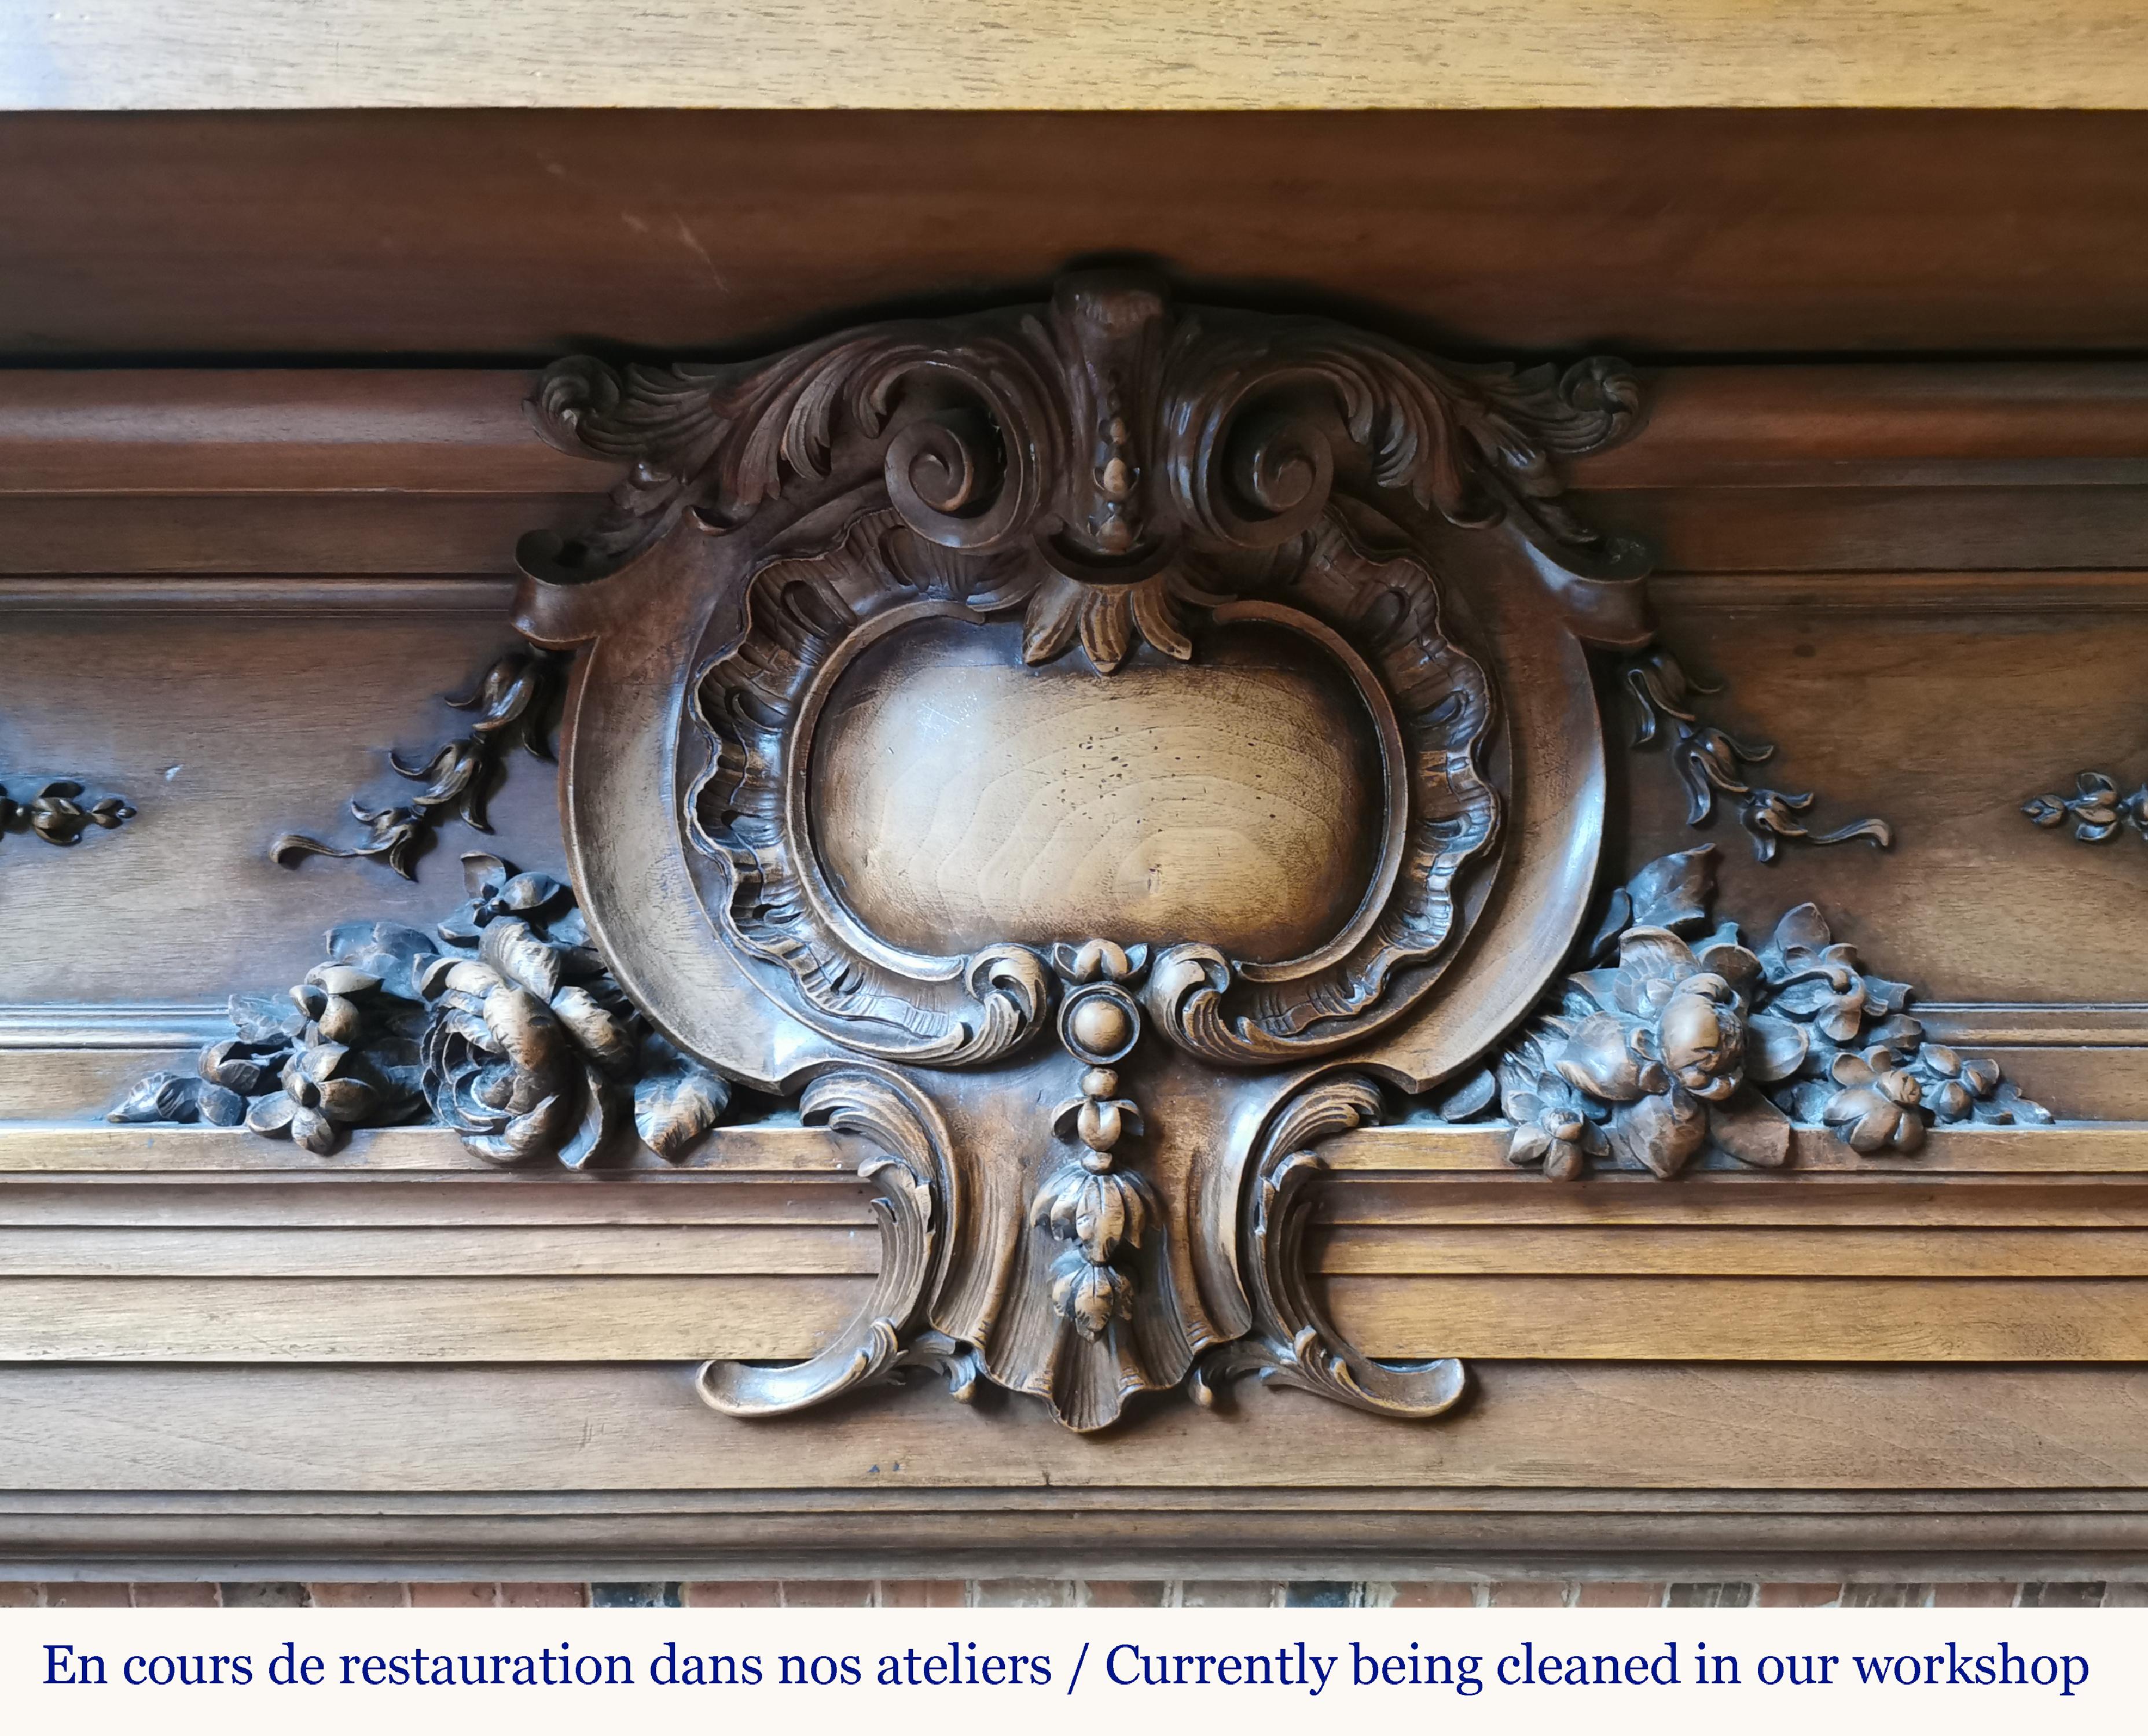 This impressive fireplace made in walnut wood during the second half of the 19th century shows a very rich and eclectic decoration typical of the Second Empire's taste.
Its rolled jambs are adorned with threatening lion faces with a mane finely